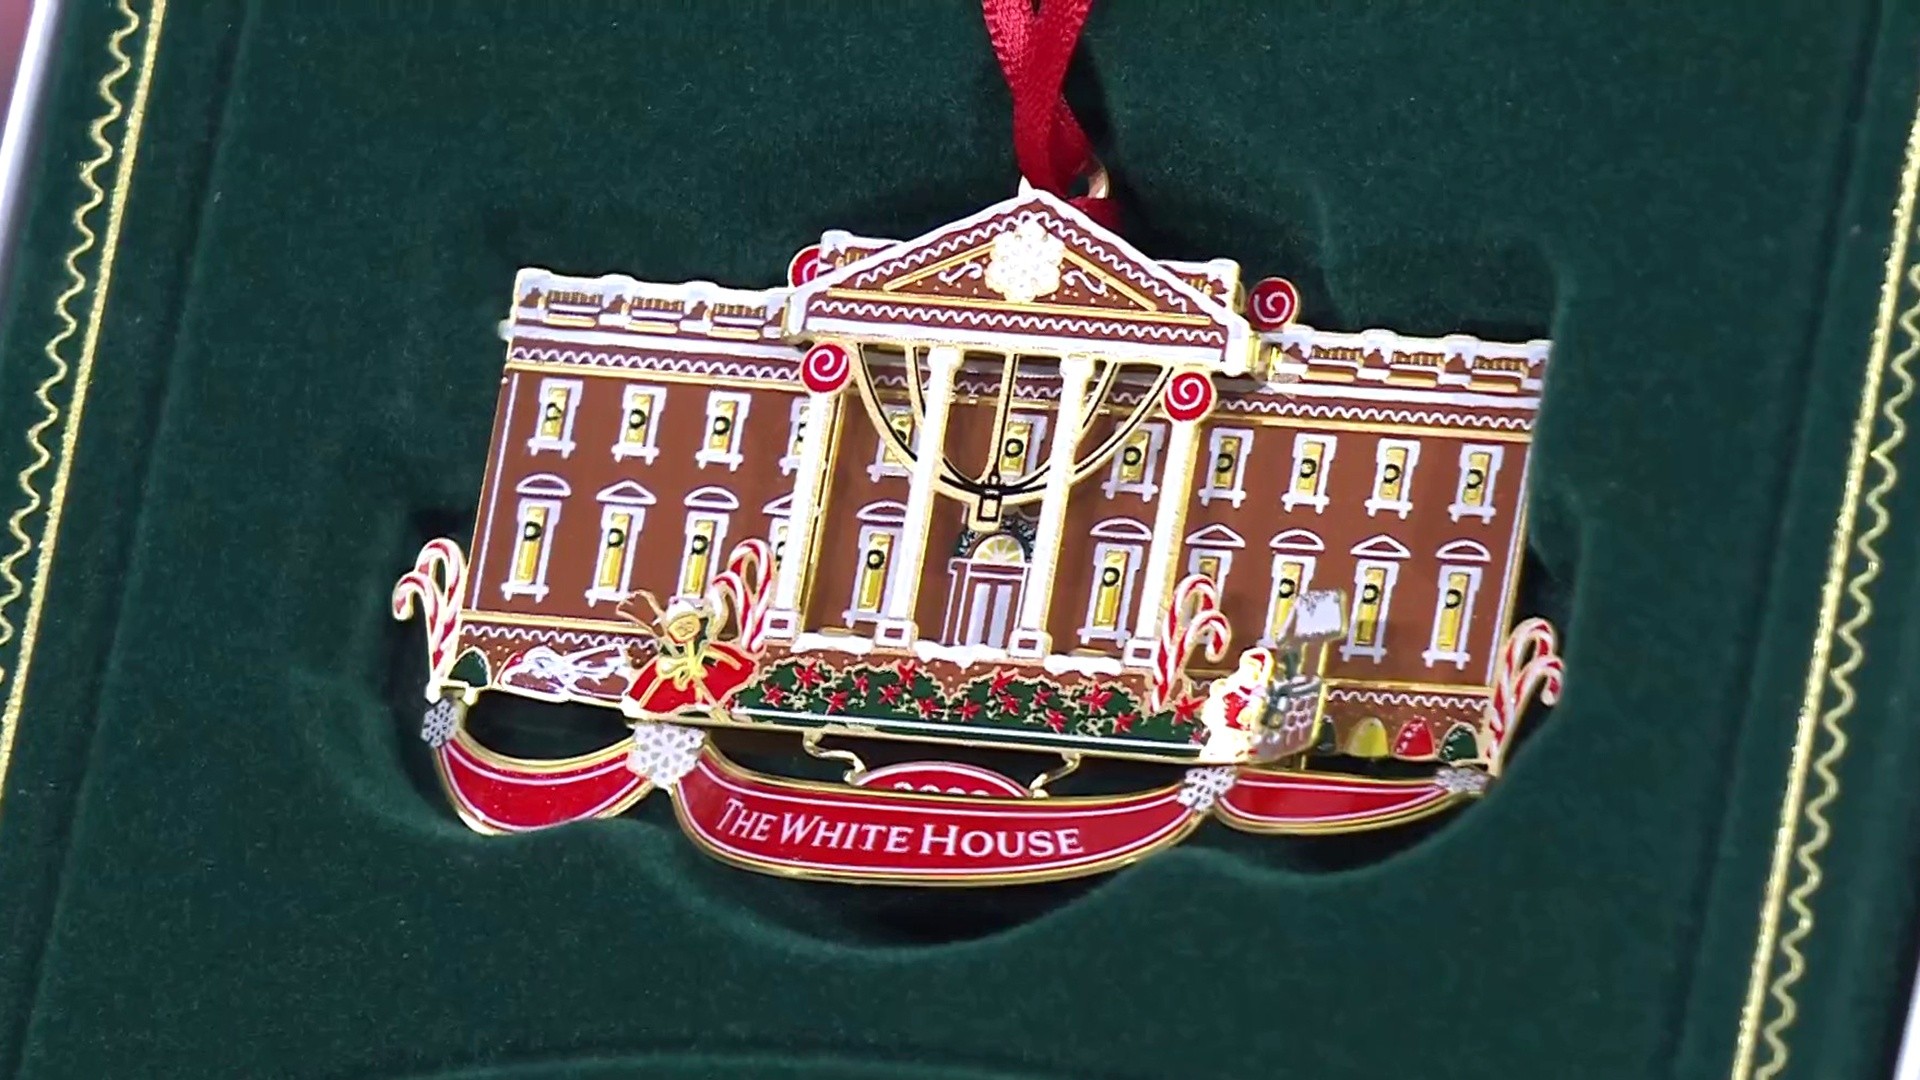 https://media-cldnry.s-nbcnews.com/image/upload/mpx/2704722219/2022_02/1645453624048_tdy_news_9a_white_house_xmas_ornament_220221_1920x1080-ktkxth.jpg